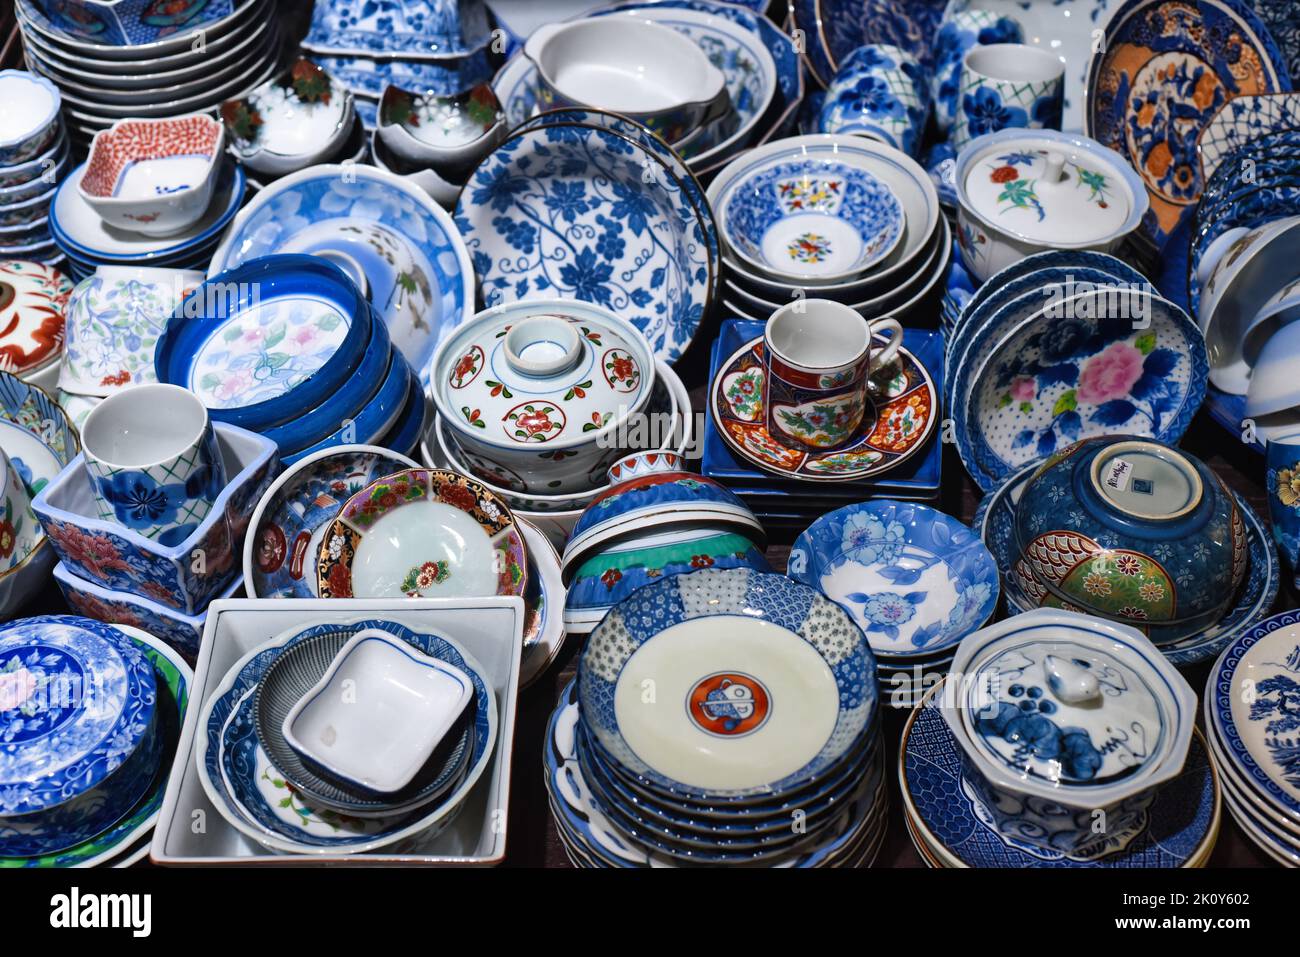 Nha Trang, Khanh Hoa - September 8, 2022: Many colorful plates and cups in vietnamese market Stock Photo